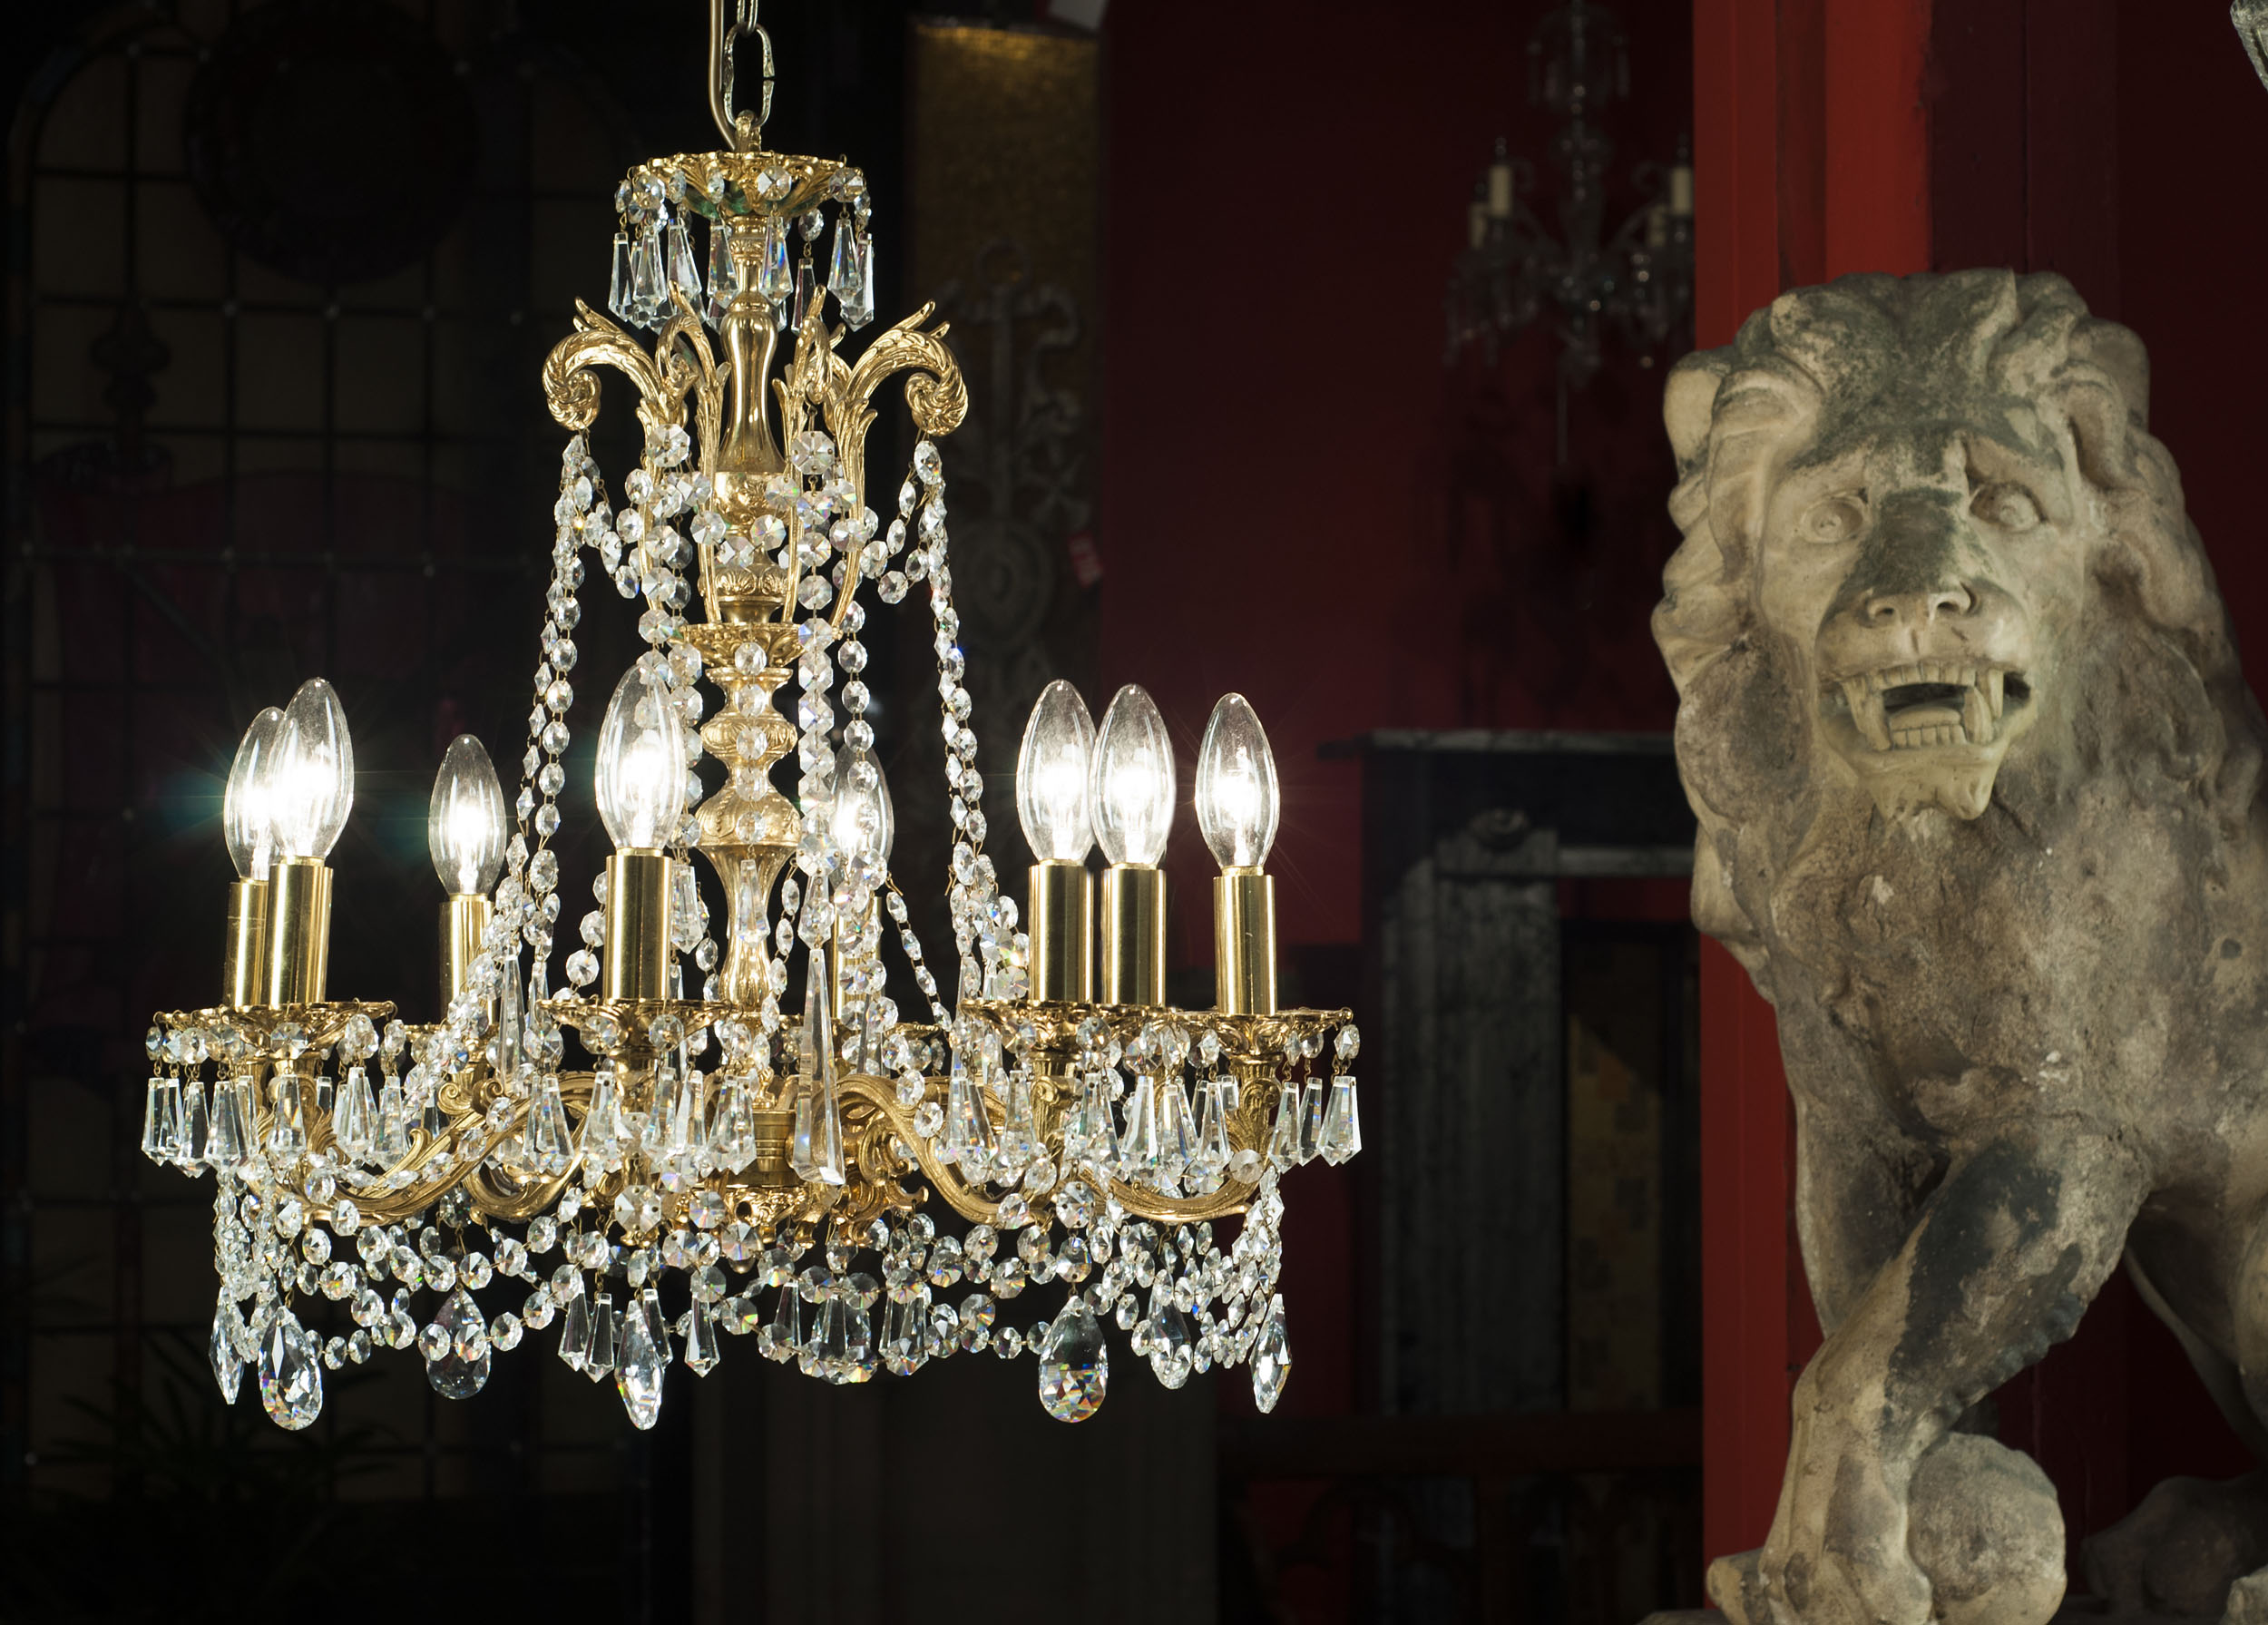 A Neoclassical Style Crystal Chandelier